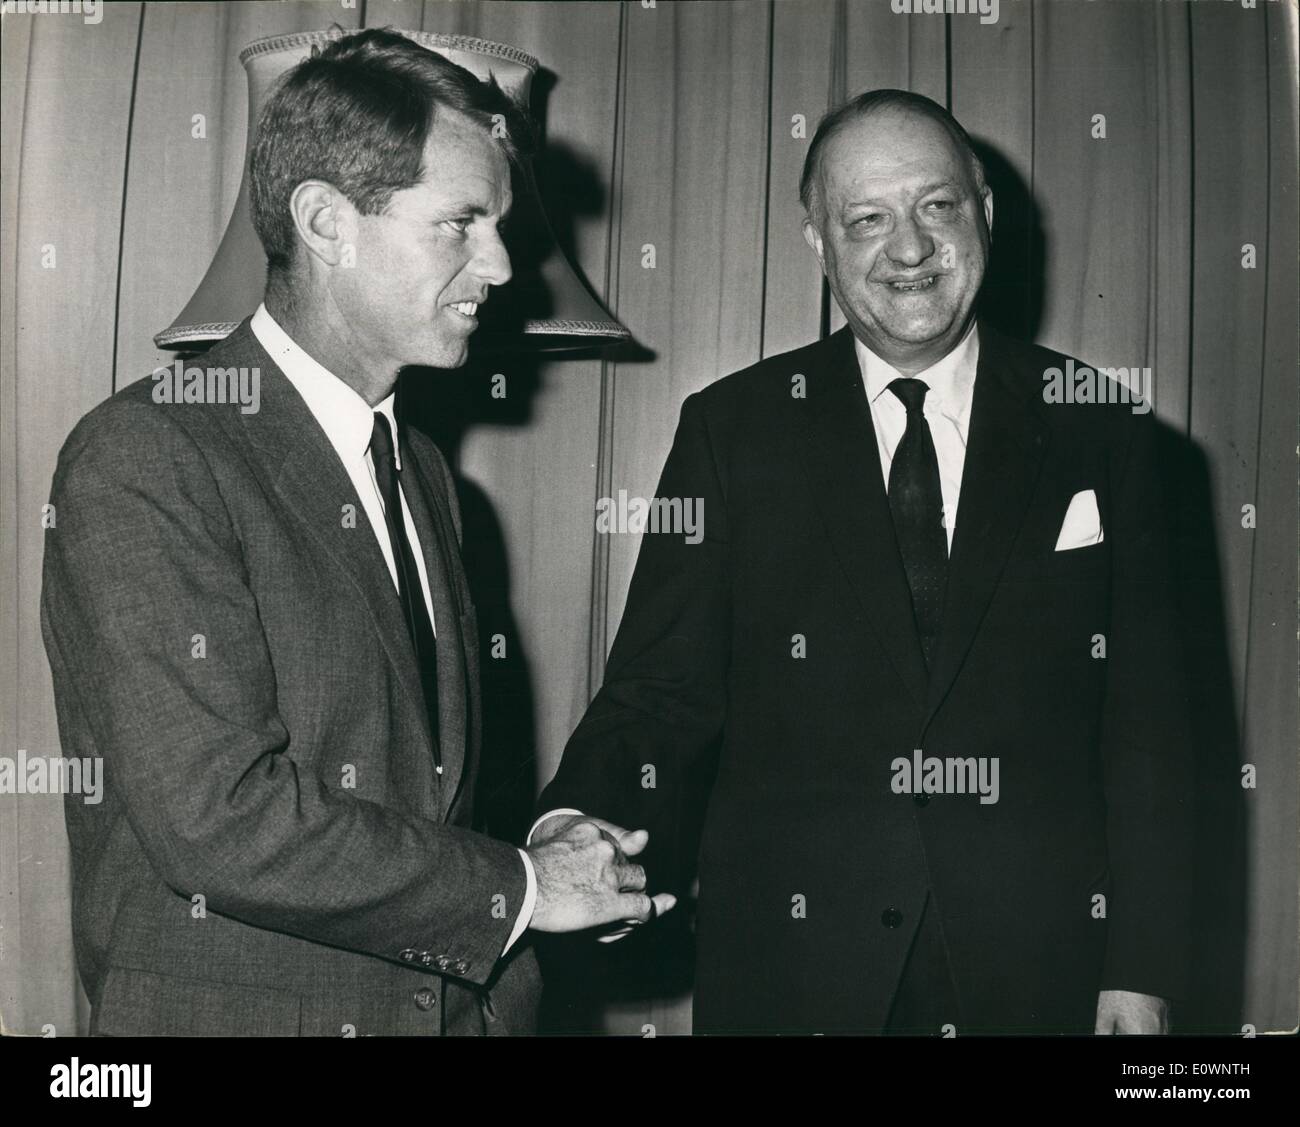 Jan. 01, 1964 - Robert Kennedy meets Mr.Butler: Mr. Robert Kennedy the US Attorney General who arrived in London this morning for talks with the British Government about his far eastern tour. Photo shows Robert F. Kennedy with Mr. Butler during their meeting this evening at the Ford Office. Stock Photo